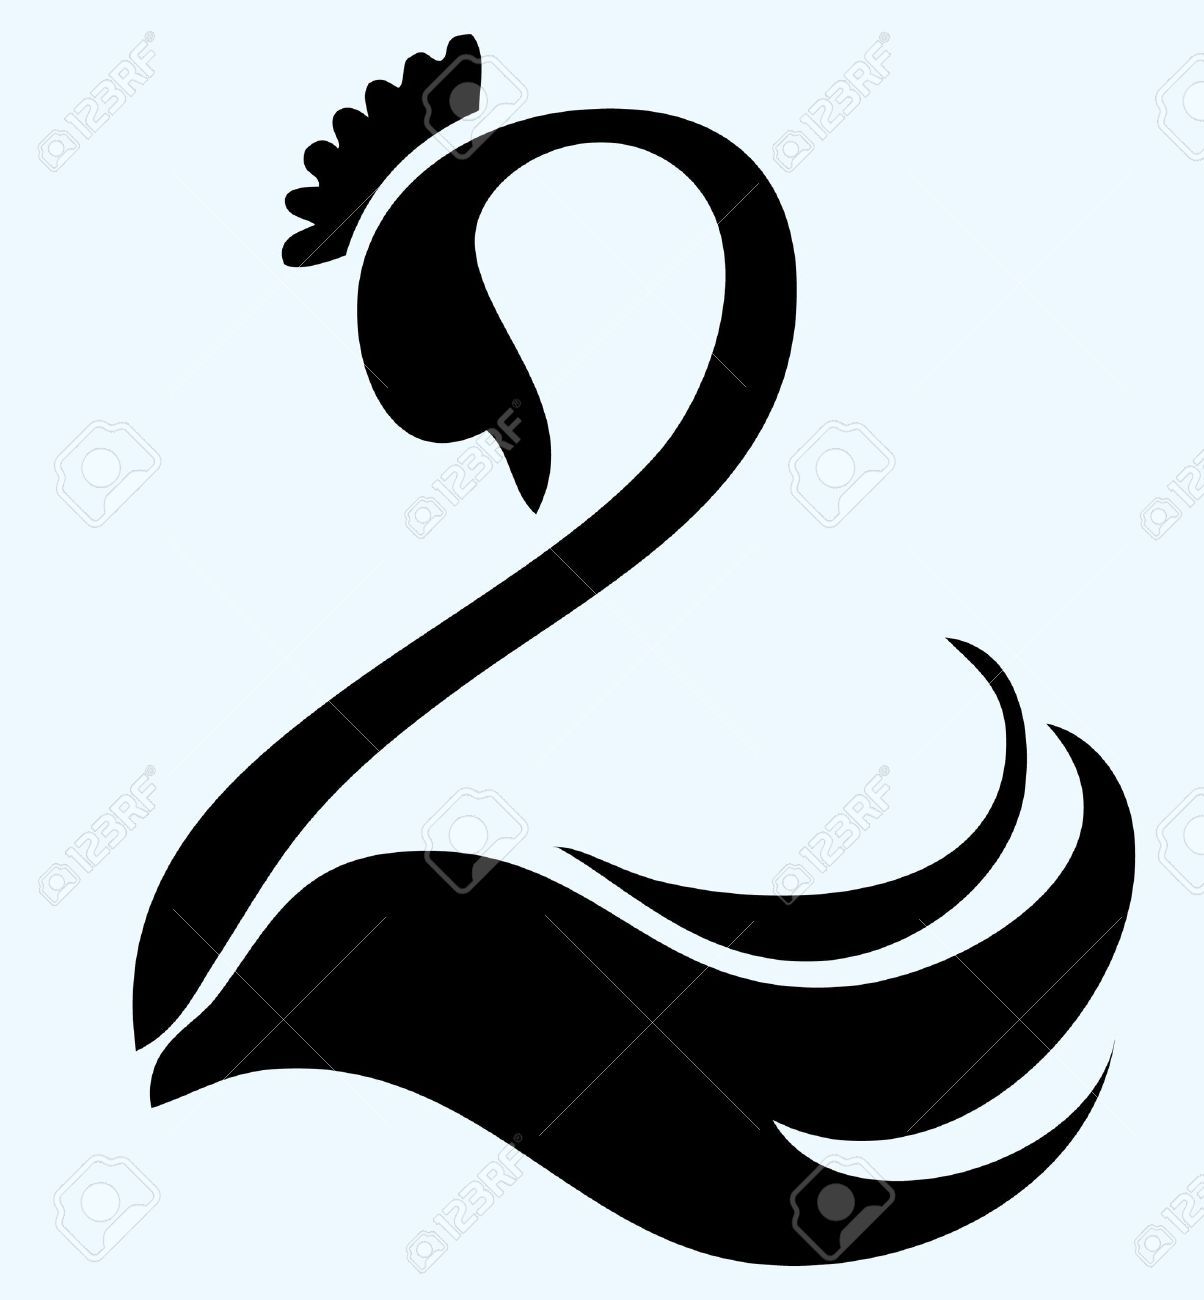 Swan Stock Vector Illustration And Royalty Free Swan Clipart